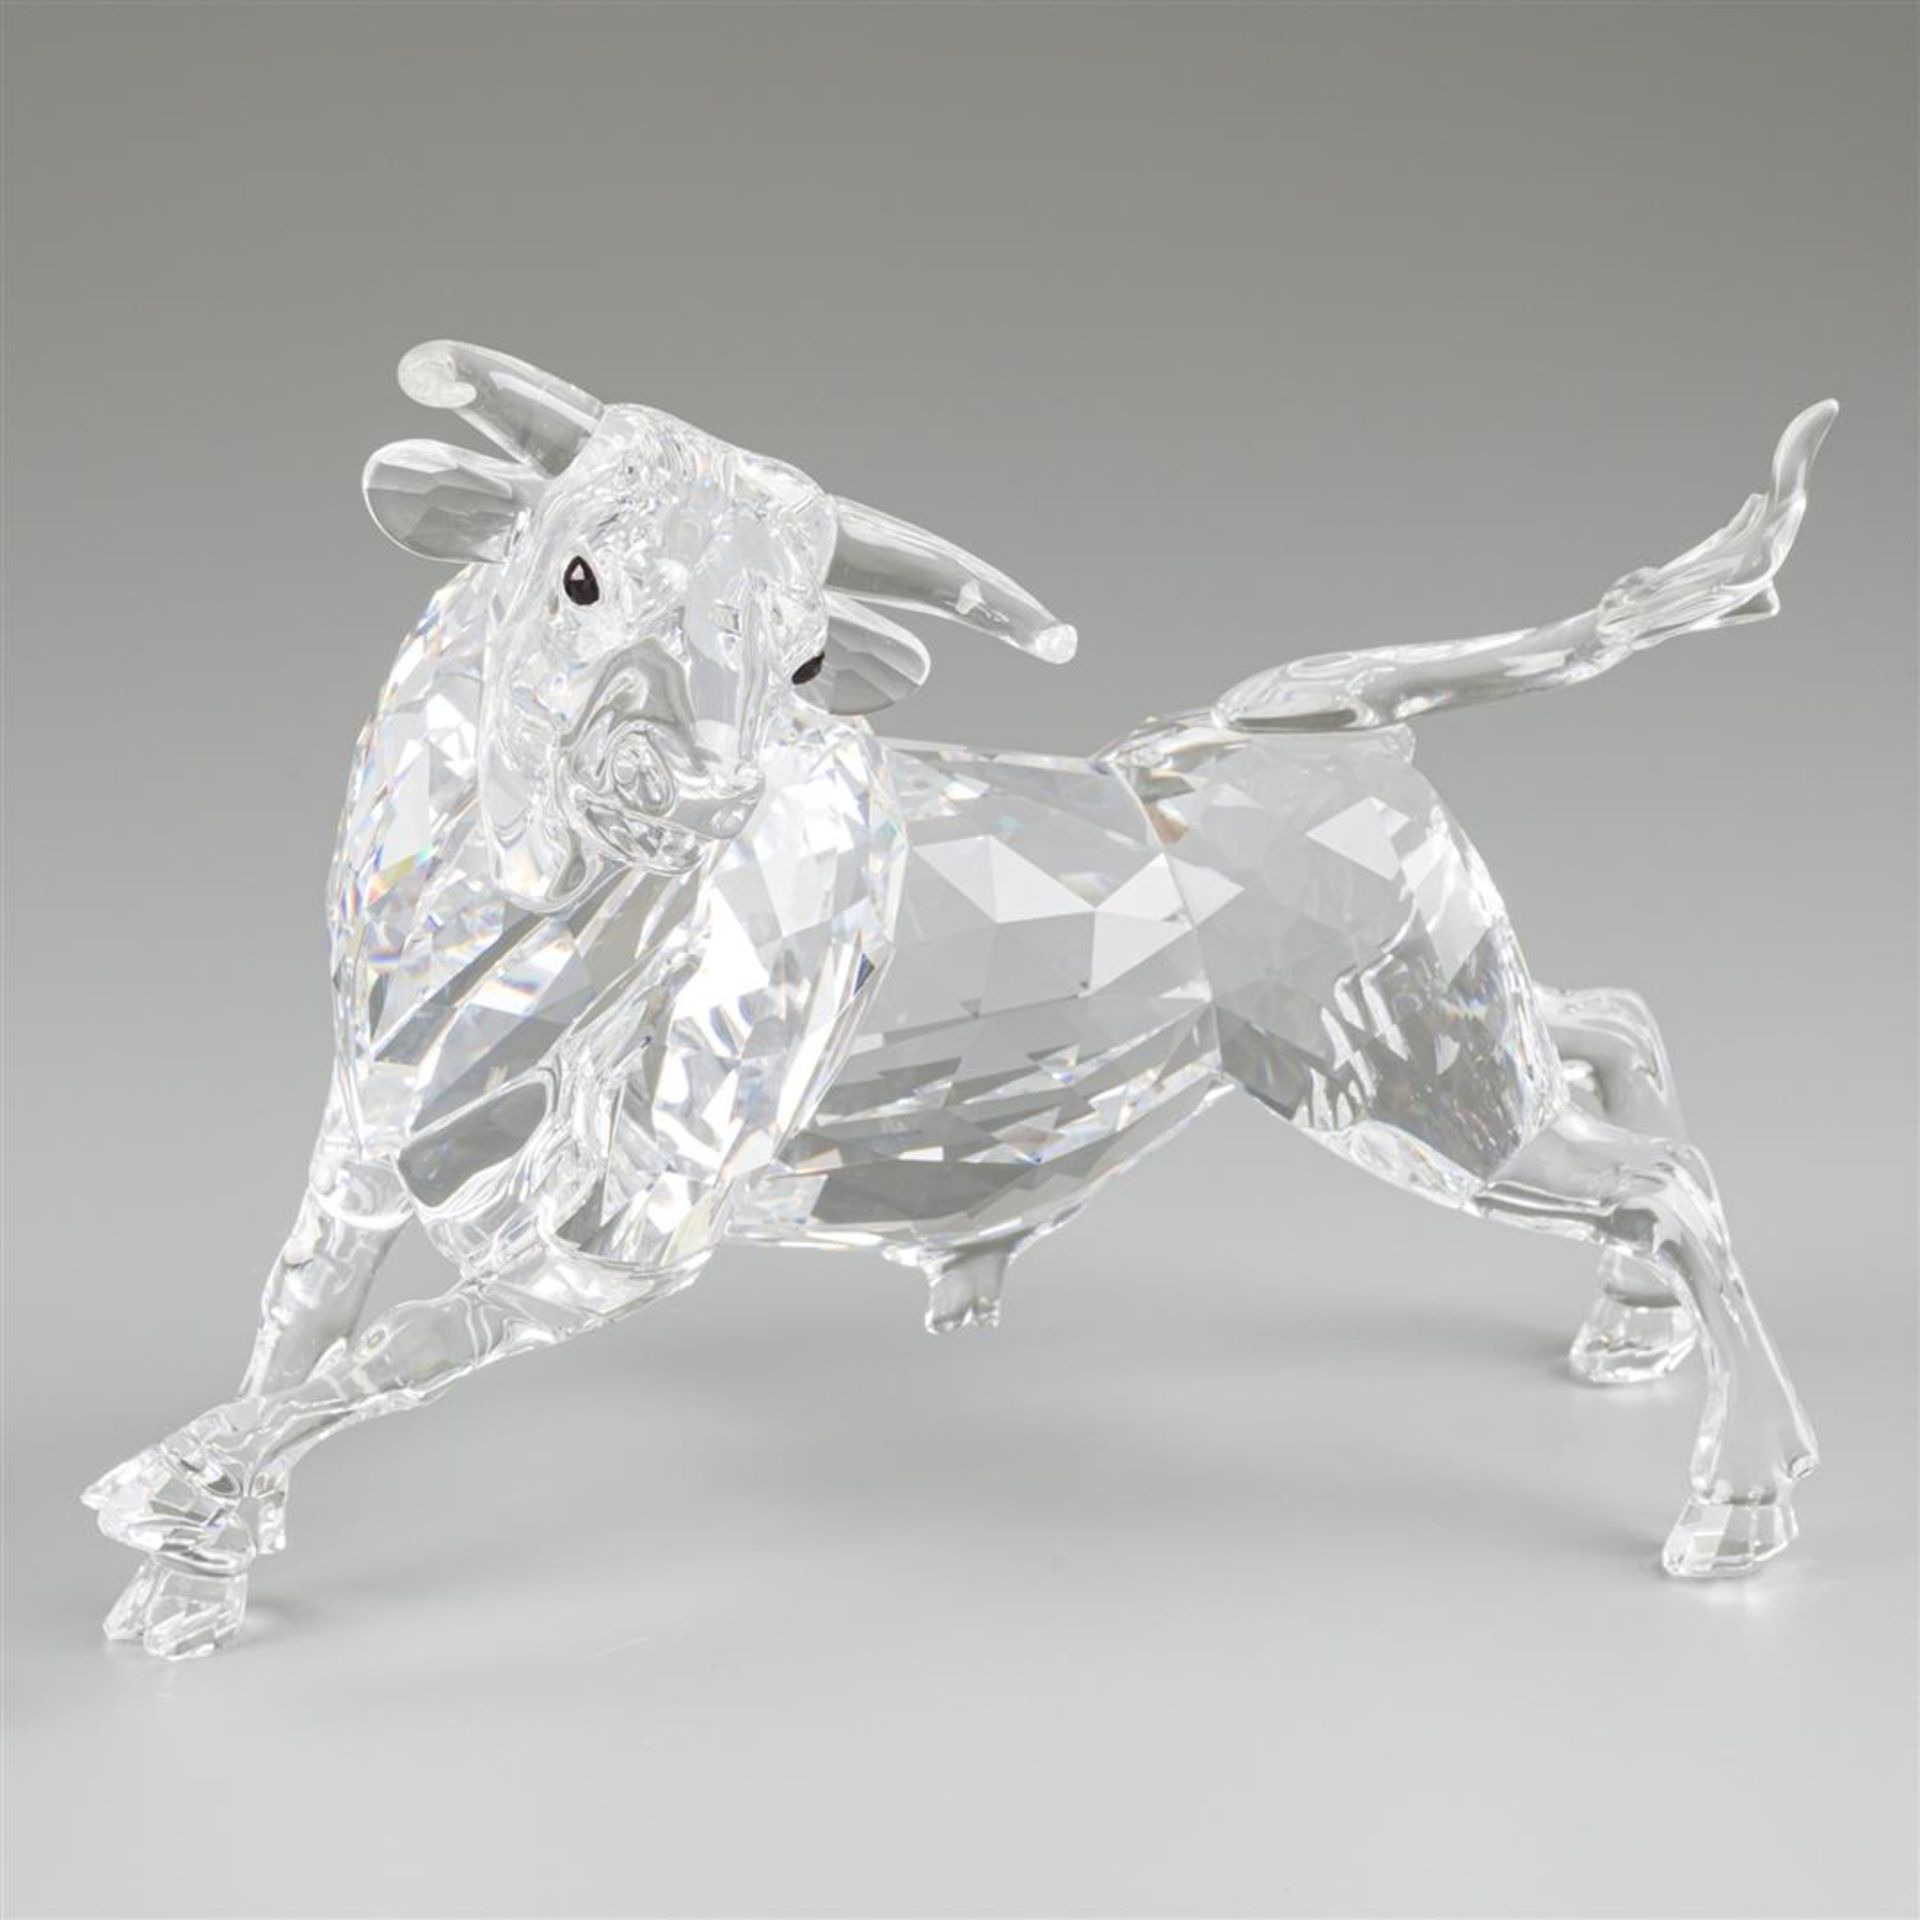 Swarovski, bull limited edition, year of release 2004, 628483. Including original box and certificat - Image 5 of 5